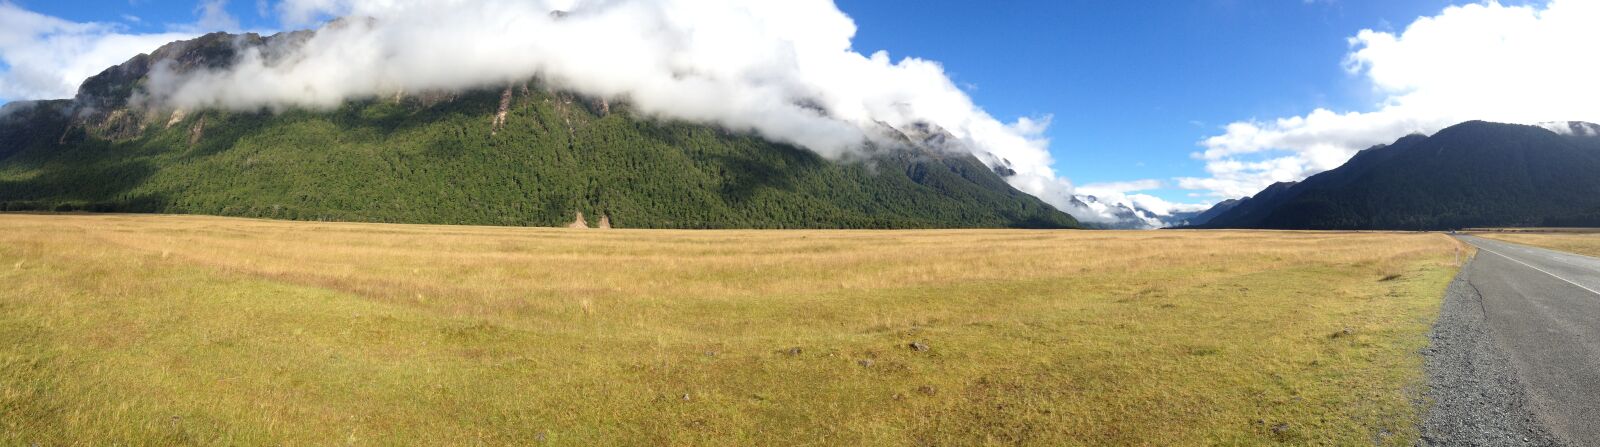 Apple iPhone 4S sample photo. Scenic, new zealand, south photography